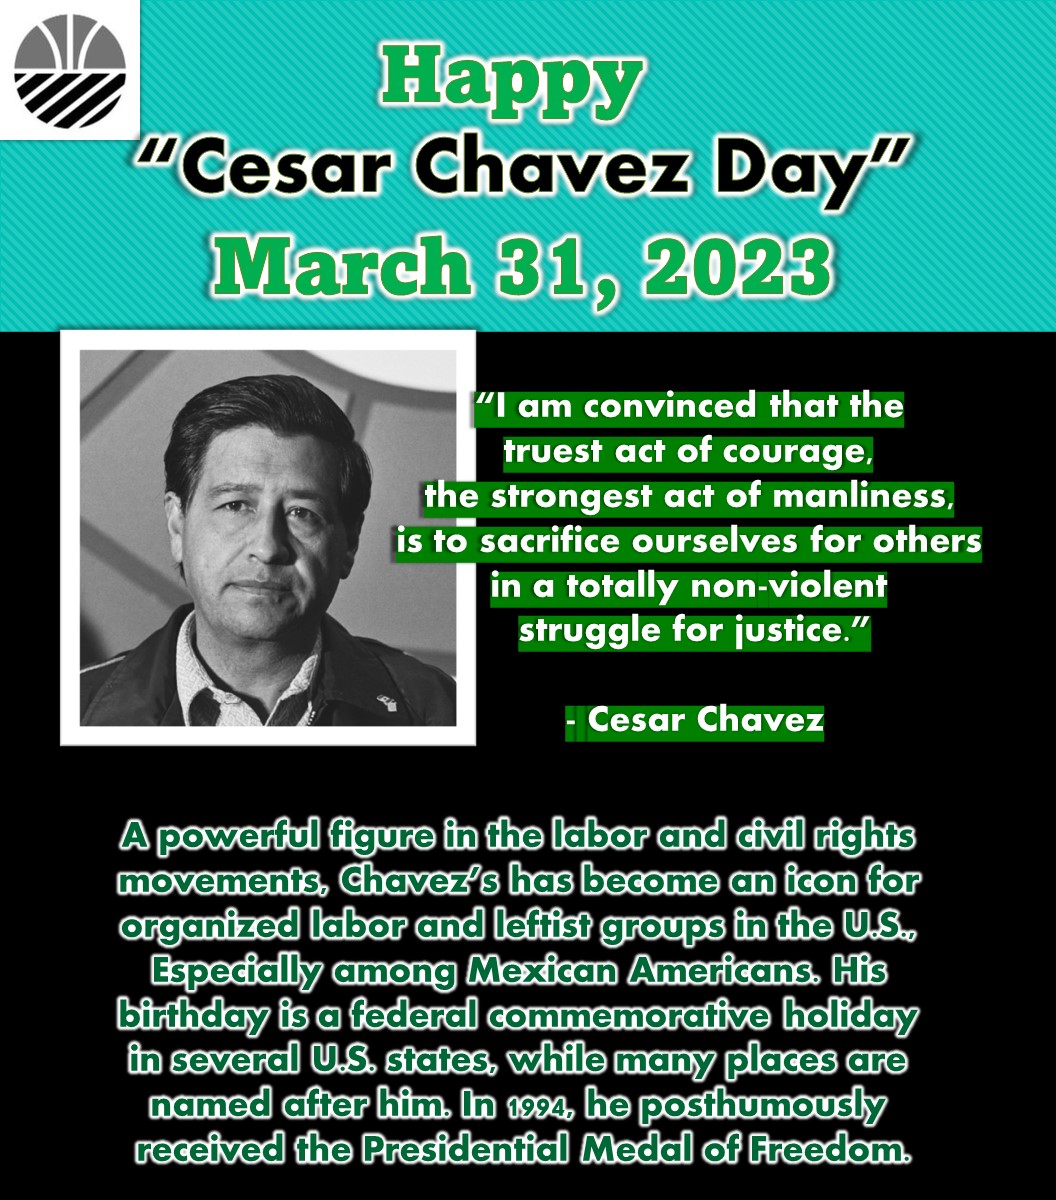 Chavez followed the tactics of #nonviolentresistance practiced by #MahatmaGandhi & #MartinLutherKingJr. He also founded the NFWA, or the United Farm Workers of America & won victories to raising pay & improving conditions for farm workers in the late 1960s & 70s. #PHIZ #PHIZNews